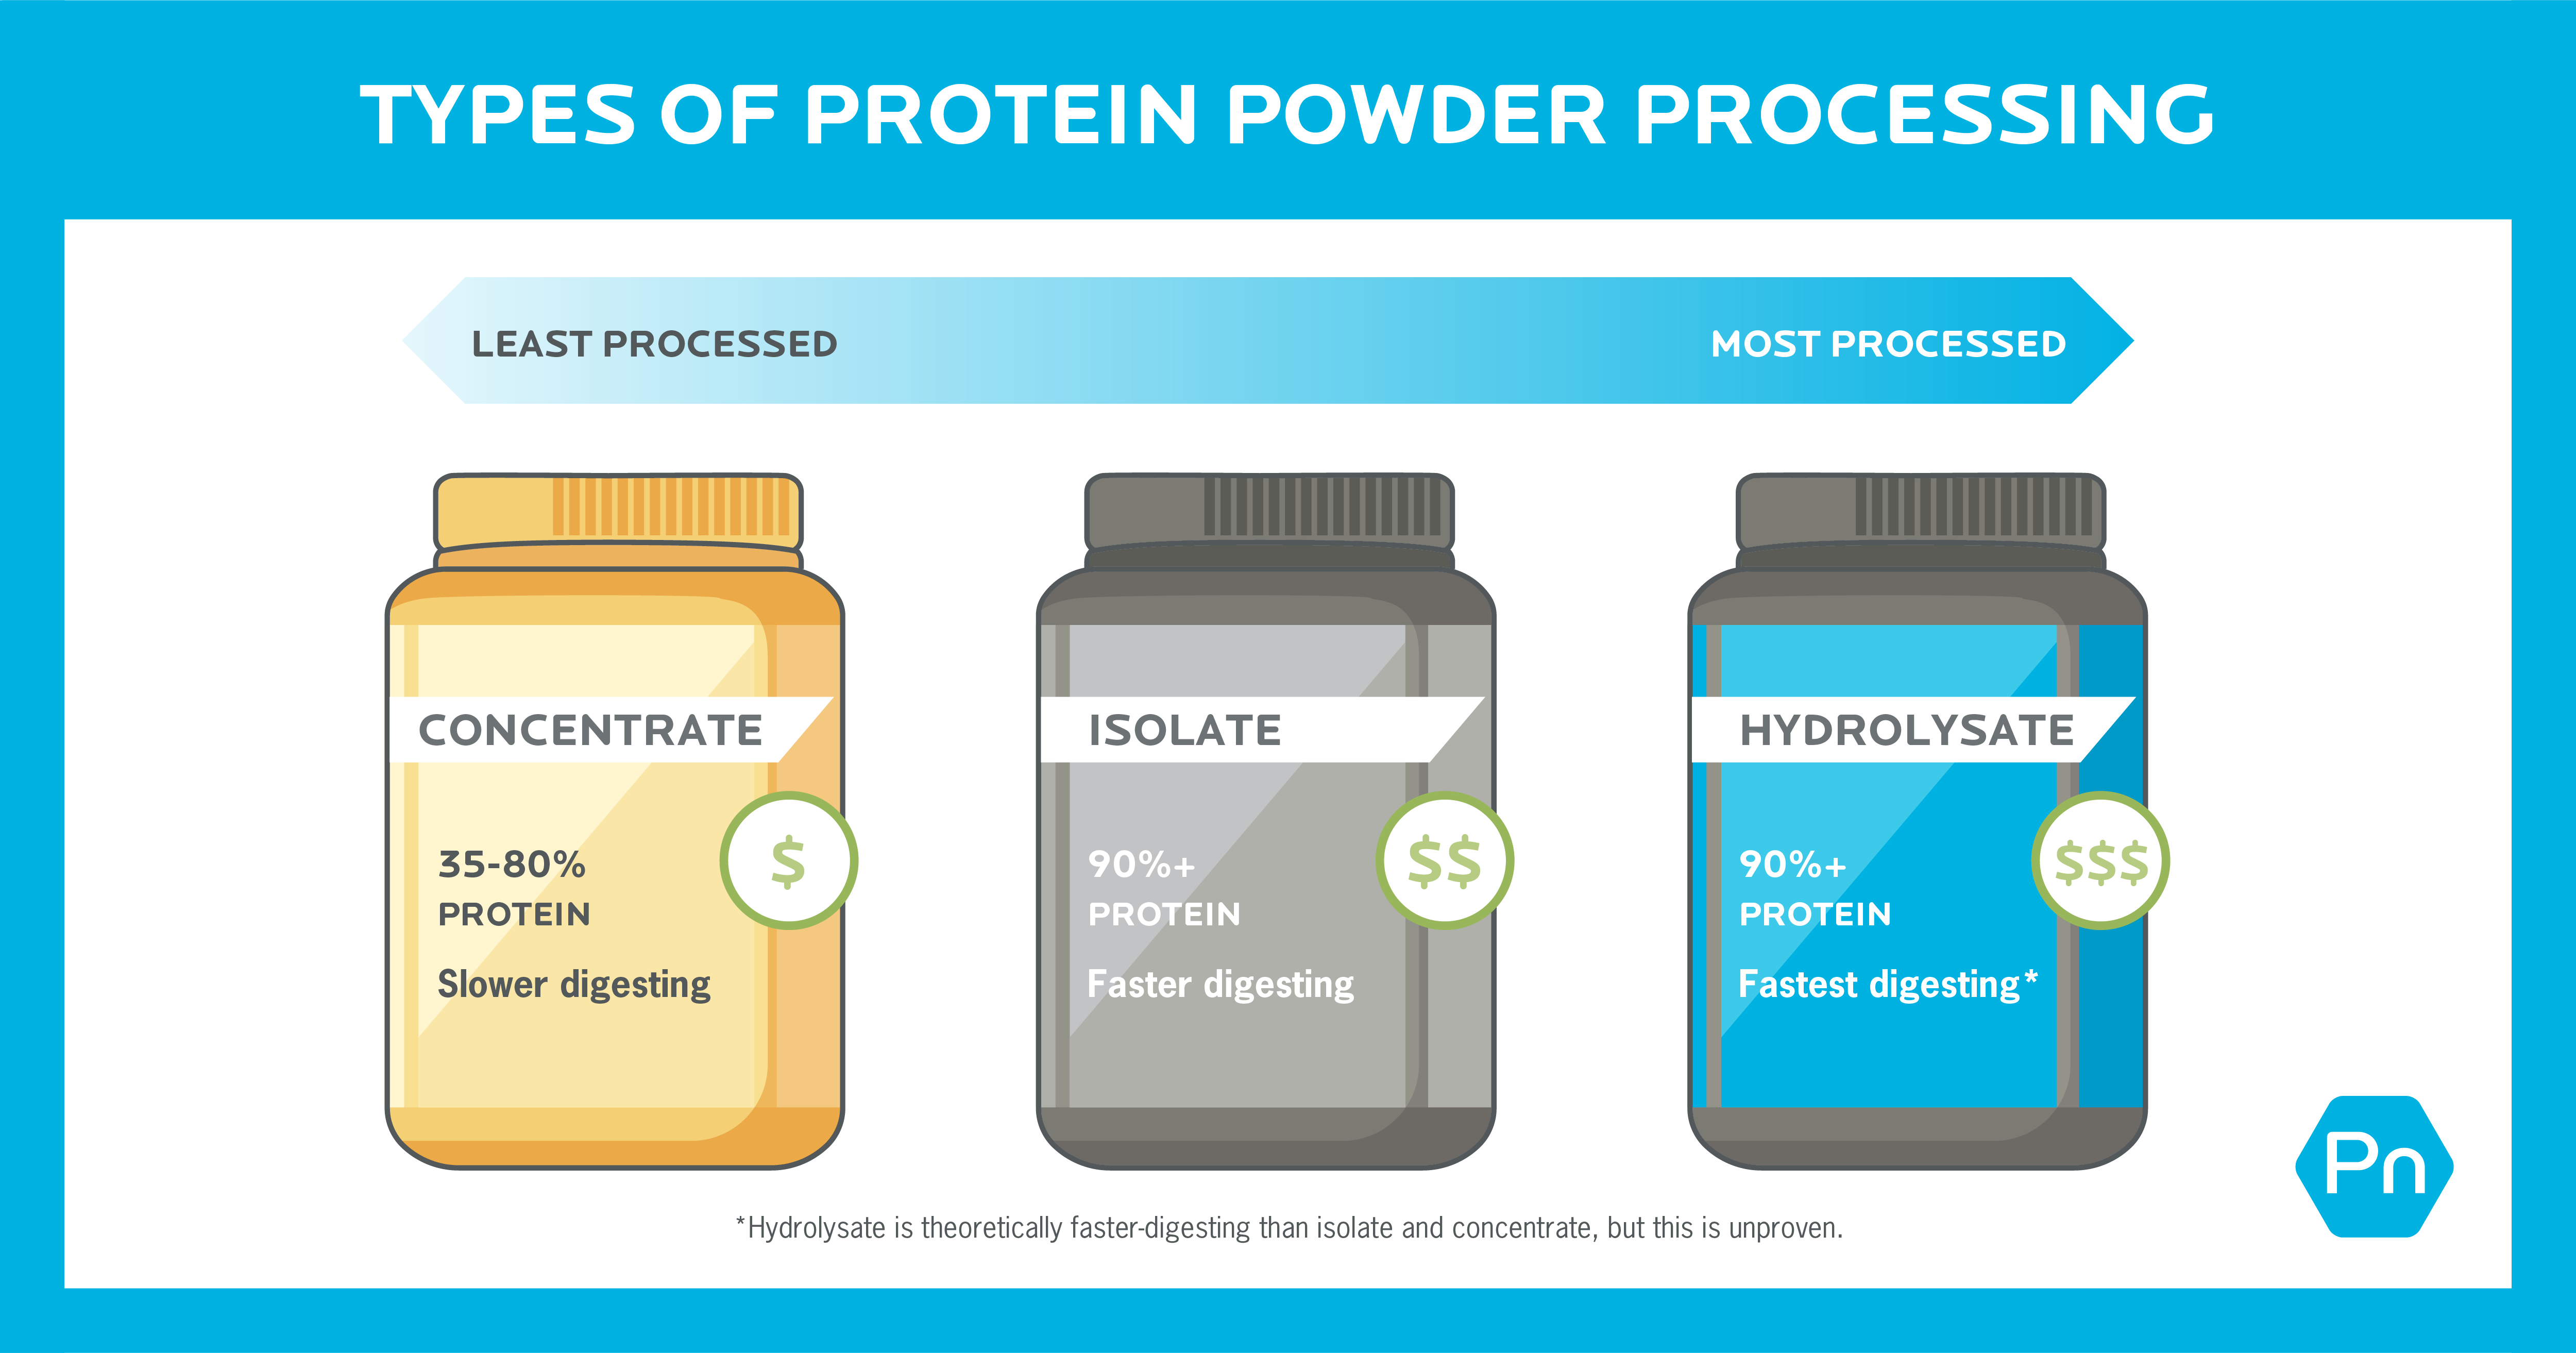 How to choose the best protein powder: A guide from Precision Nutrition